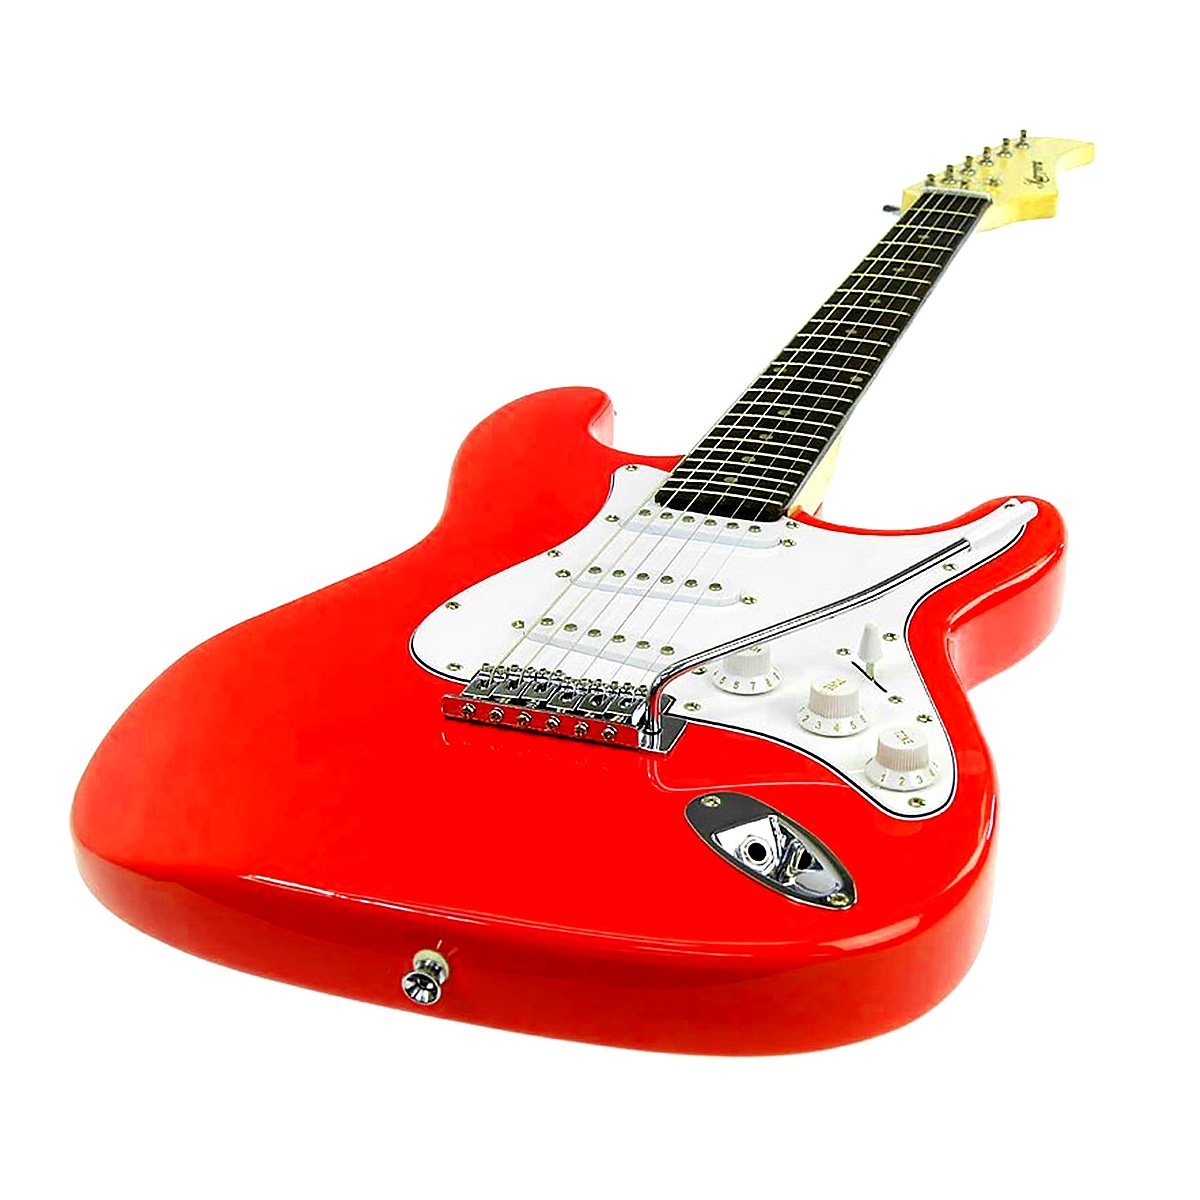 Adjustable 39in Electric Guitar, Gloss Finish - Karrera Red